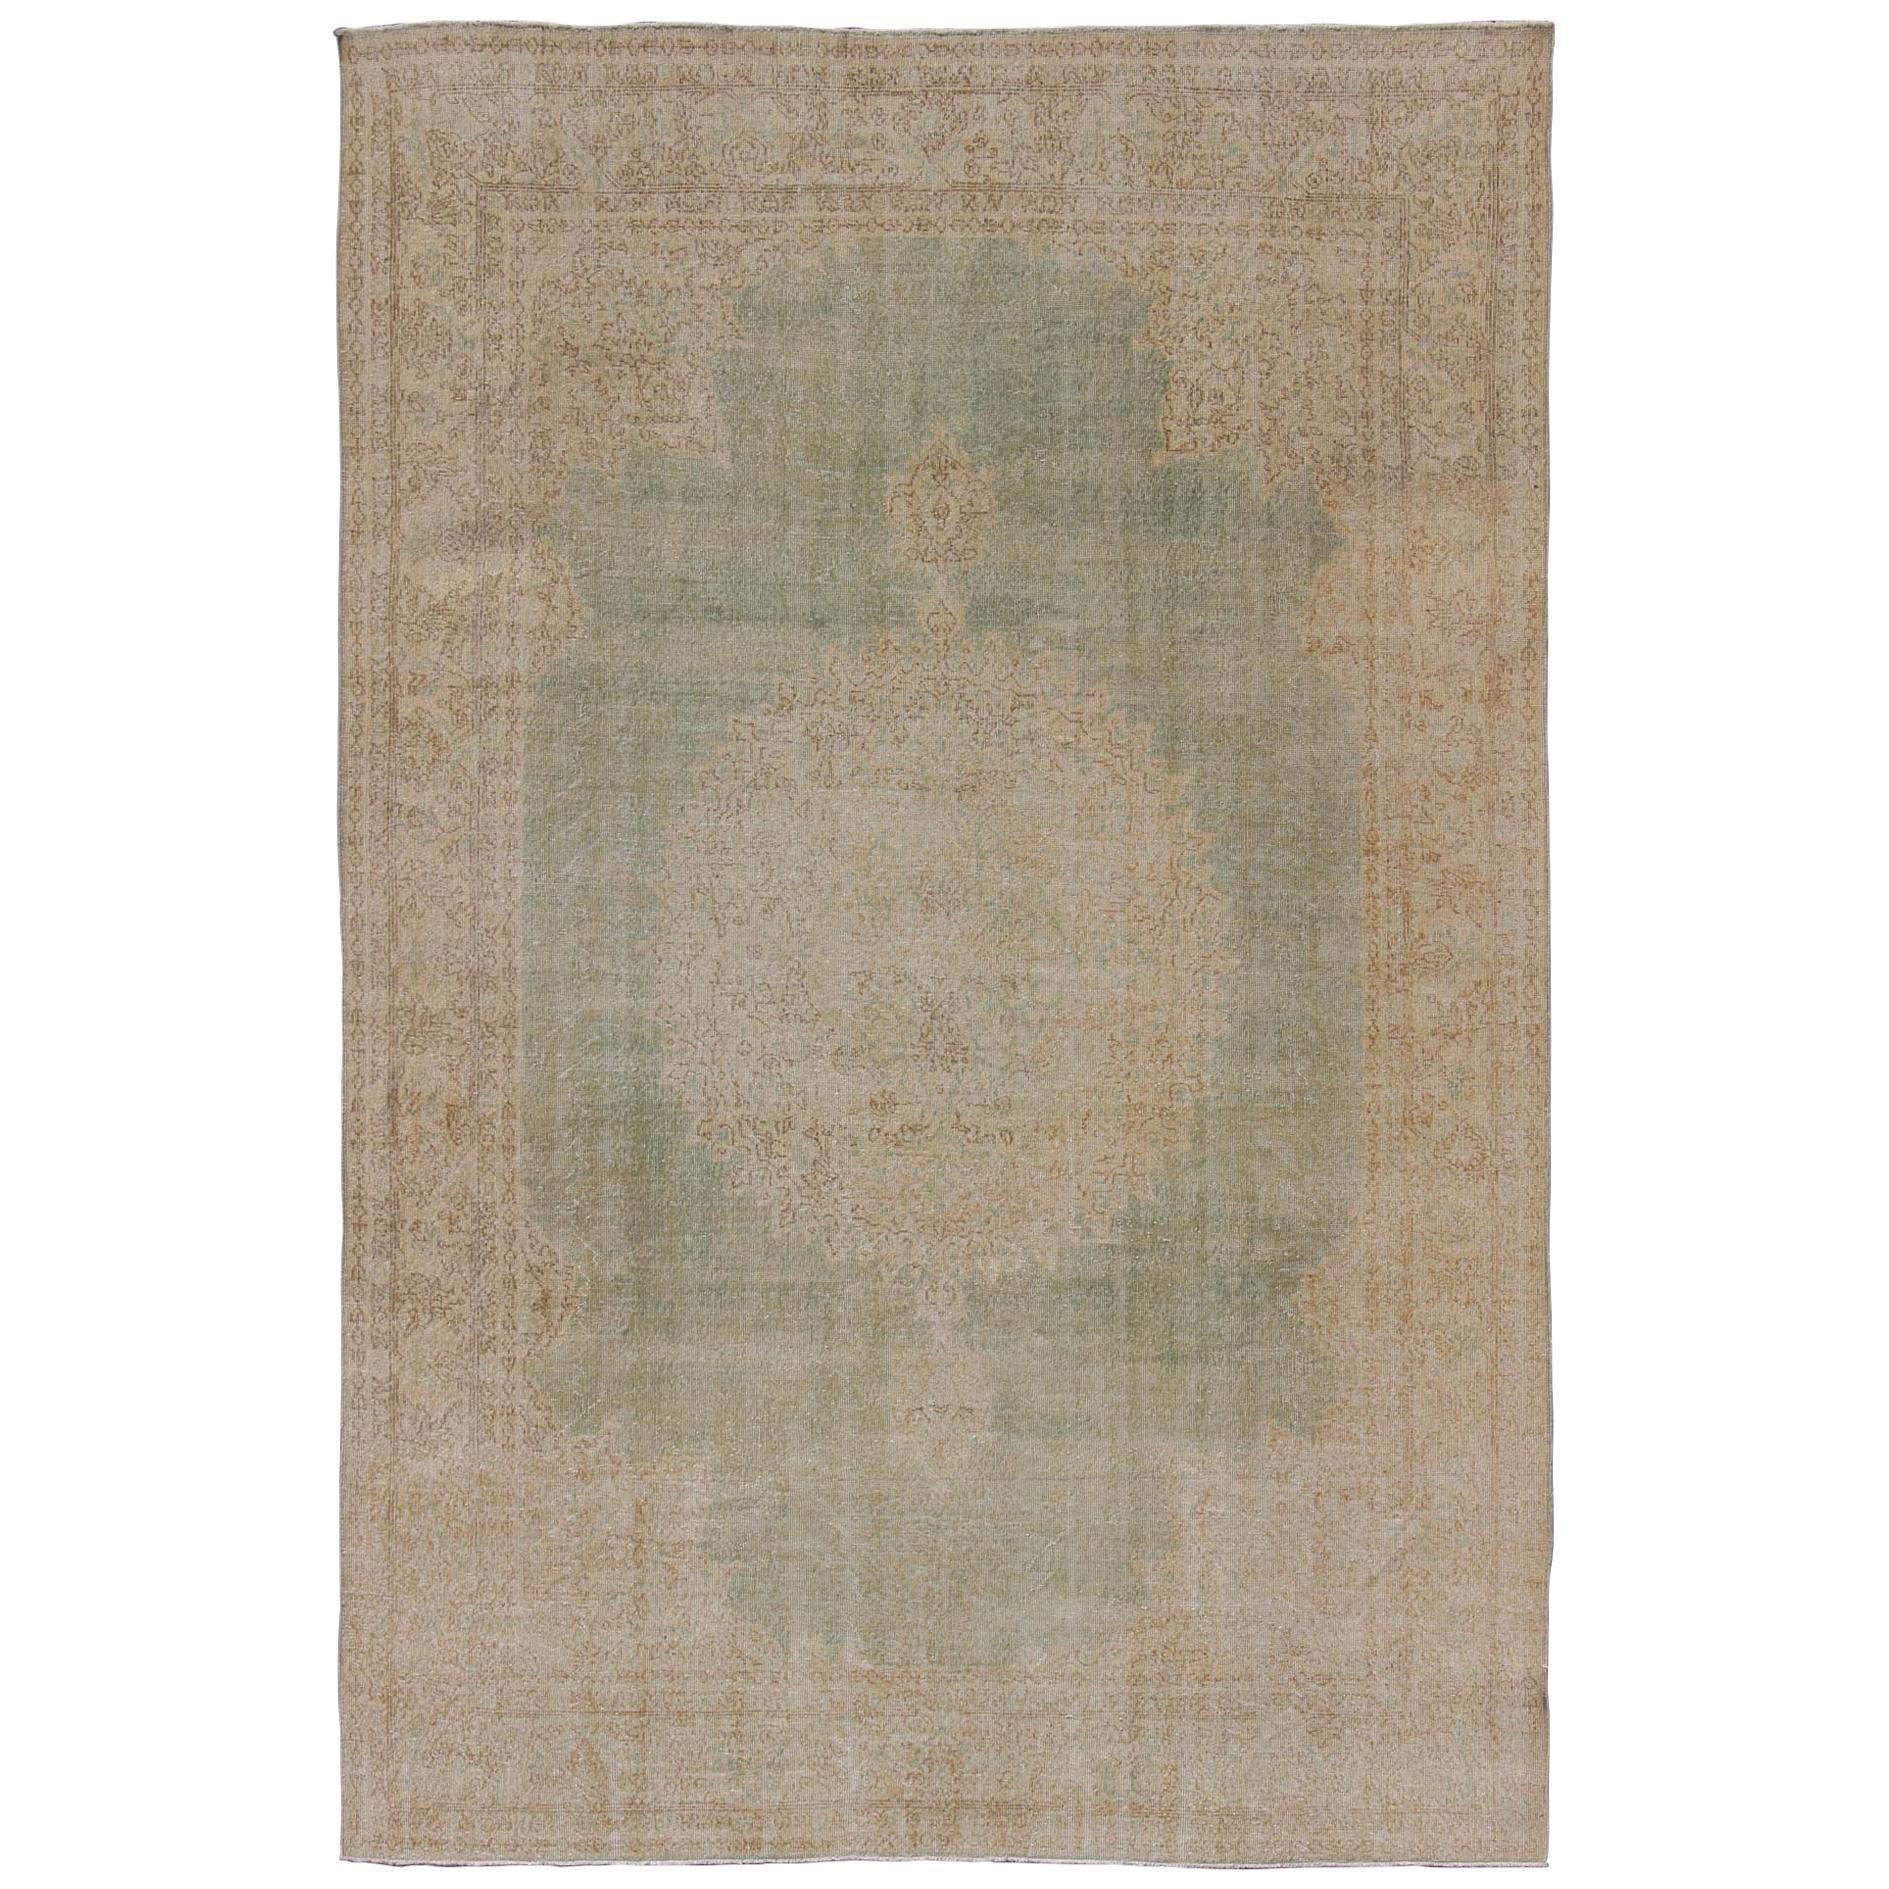 Distressed Turkish Carpet with Floral Medallion in Light Green, Tan and Taupe